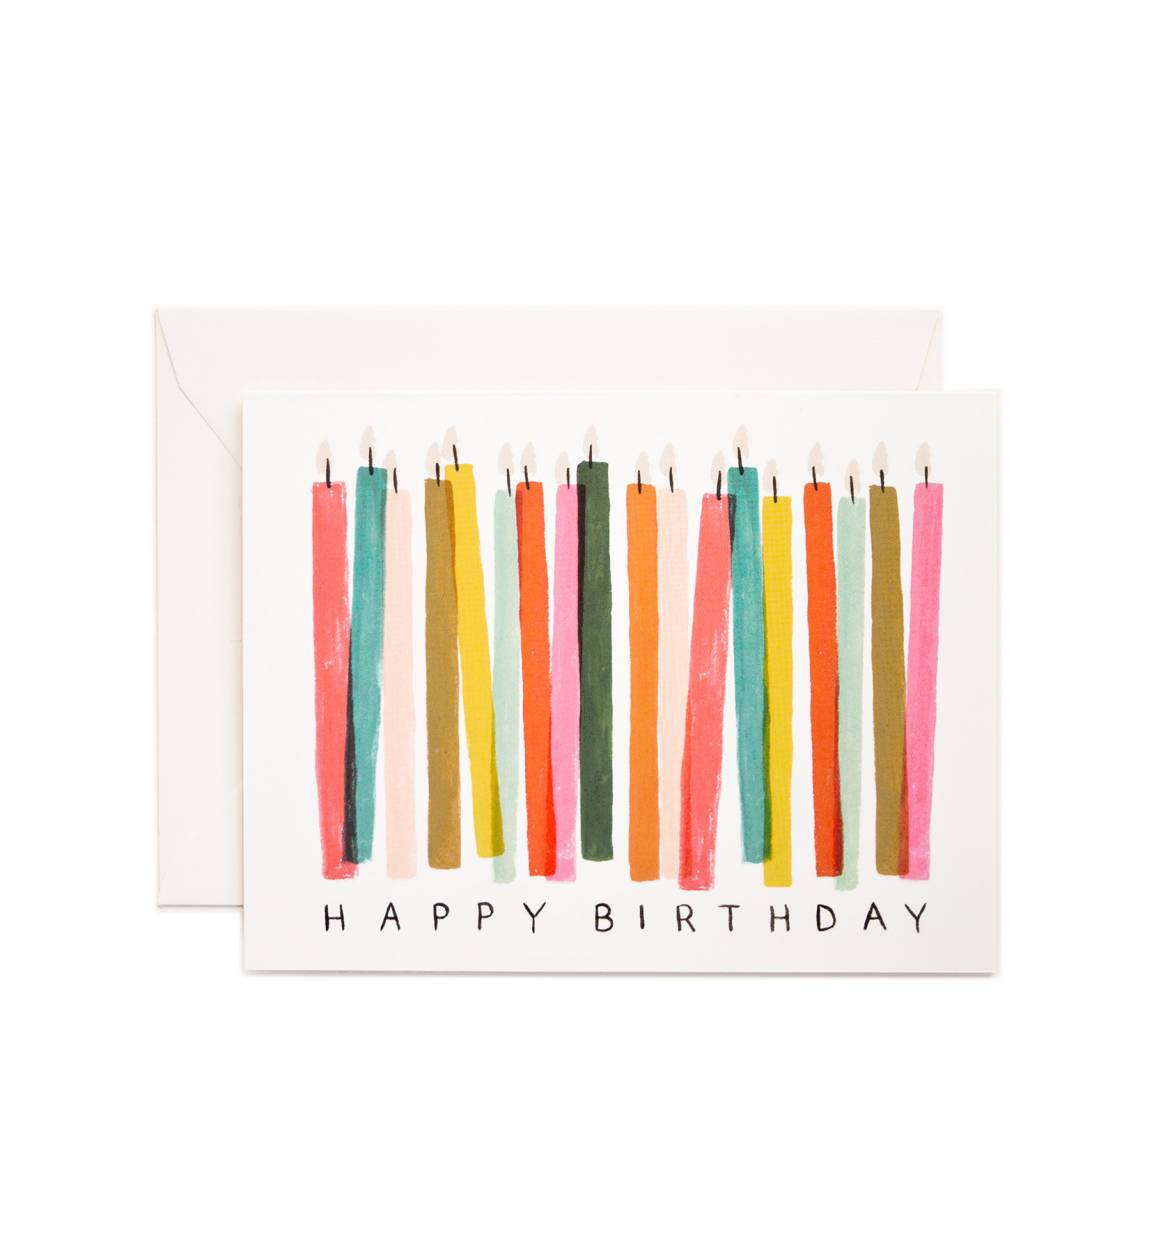 Birthday Candles Greeting Card by RIFLE PAPER Co. | Made in USA